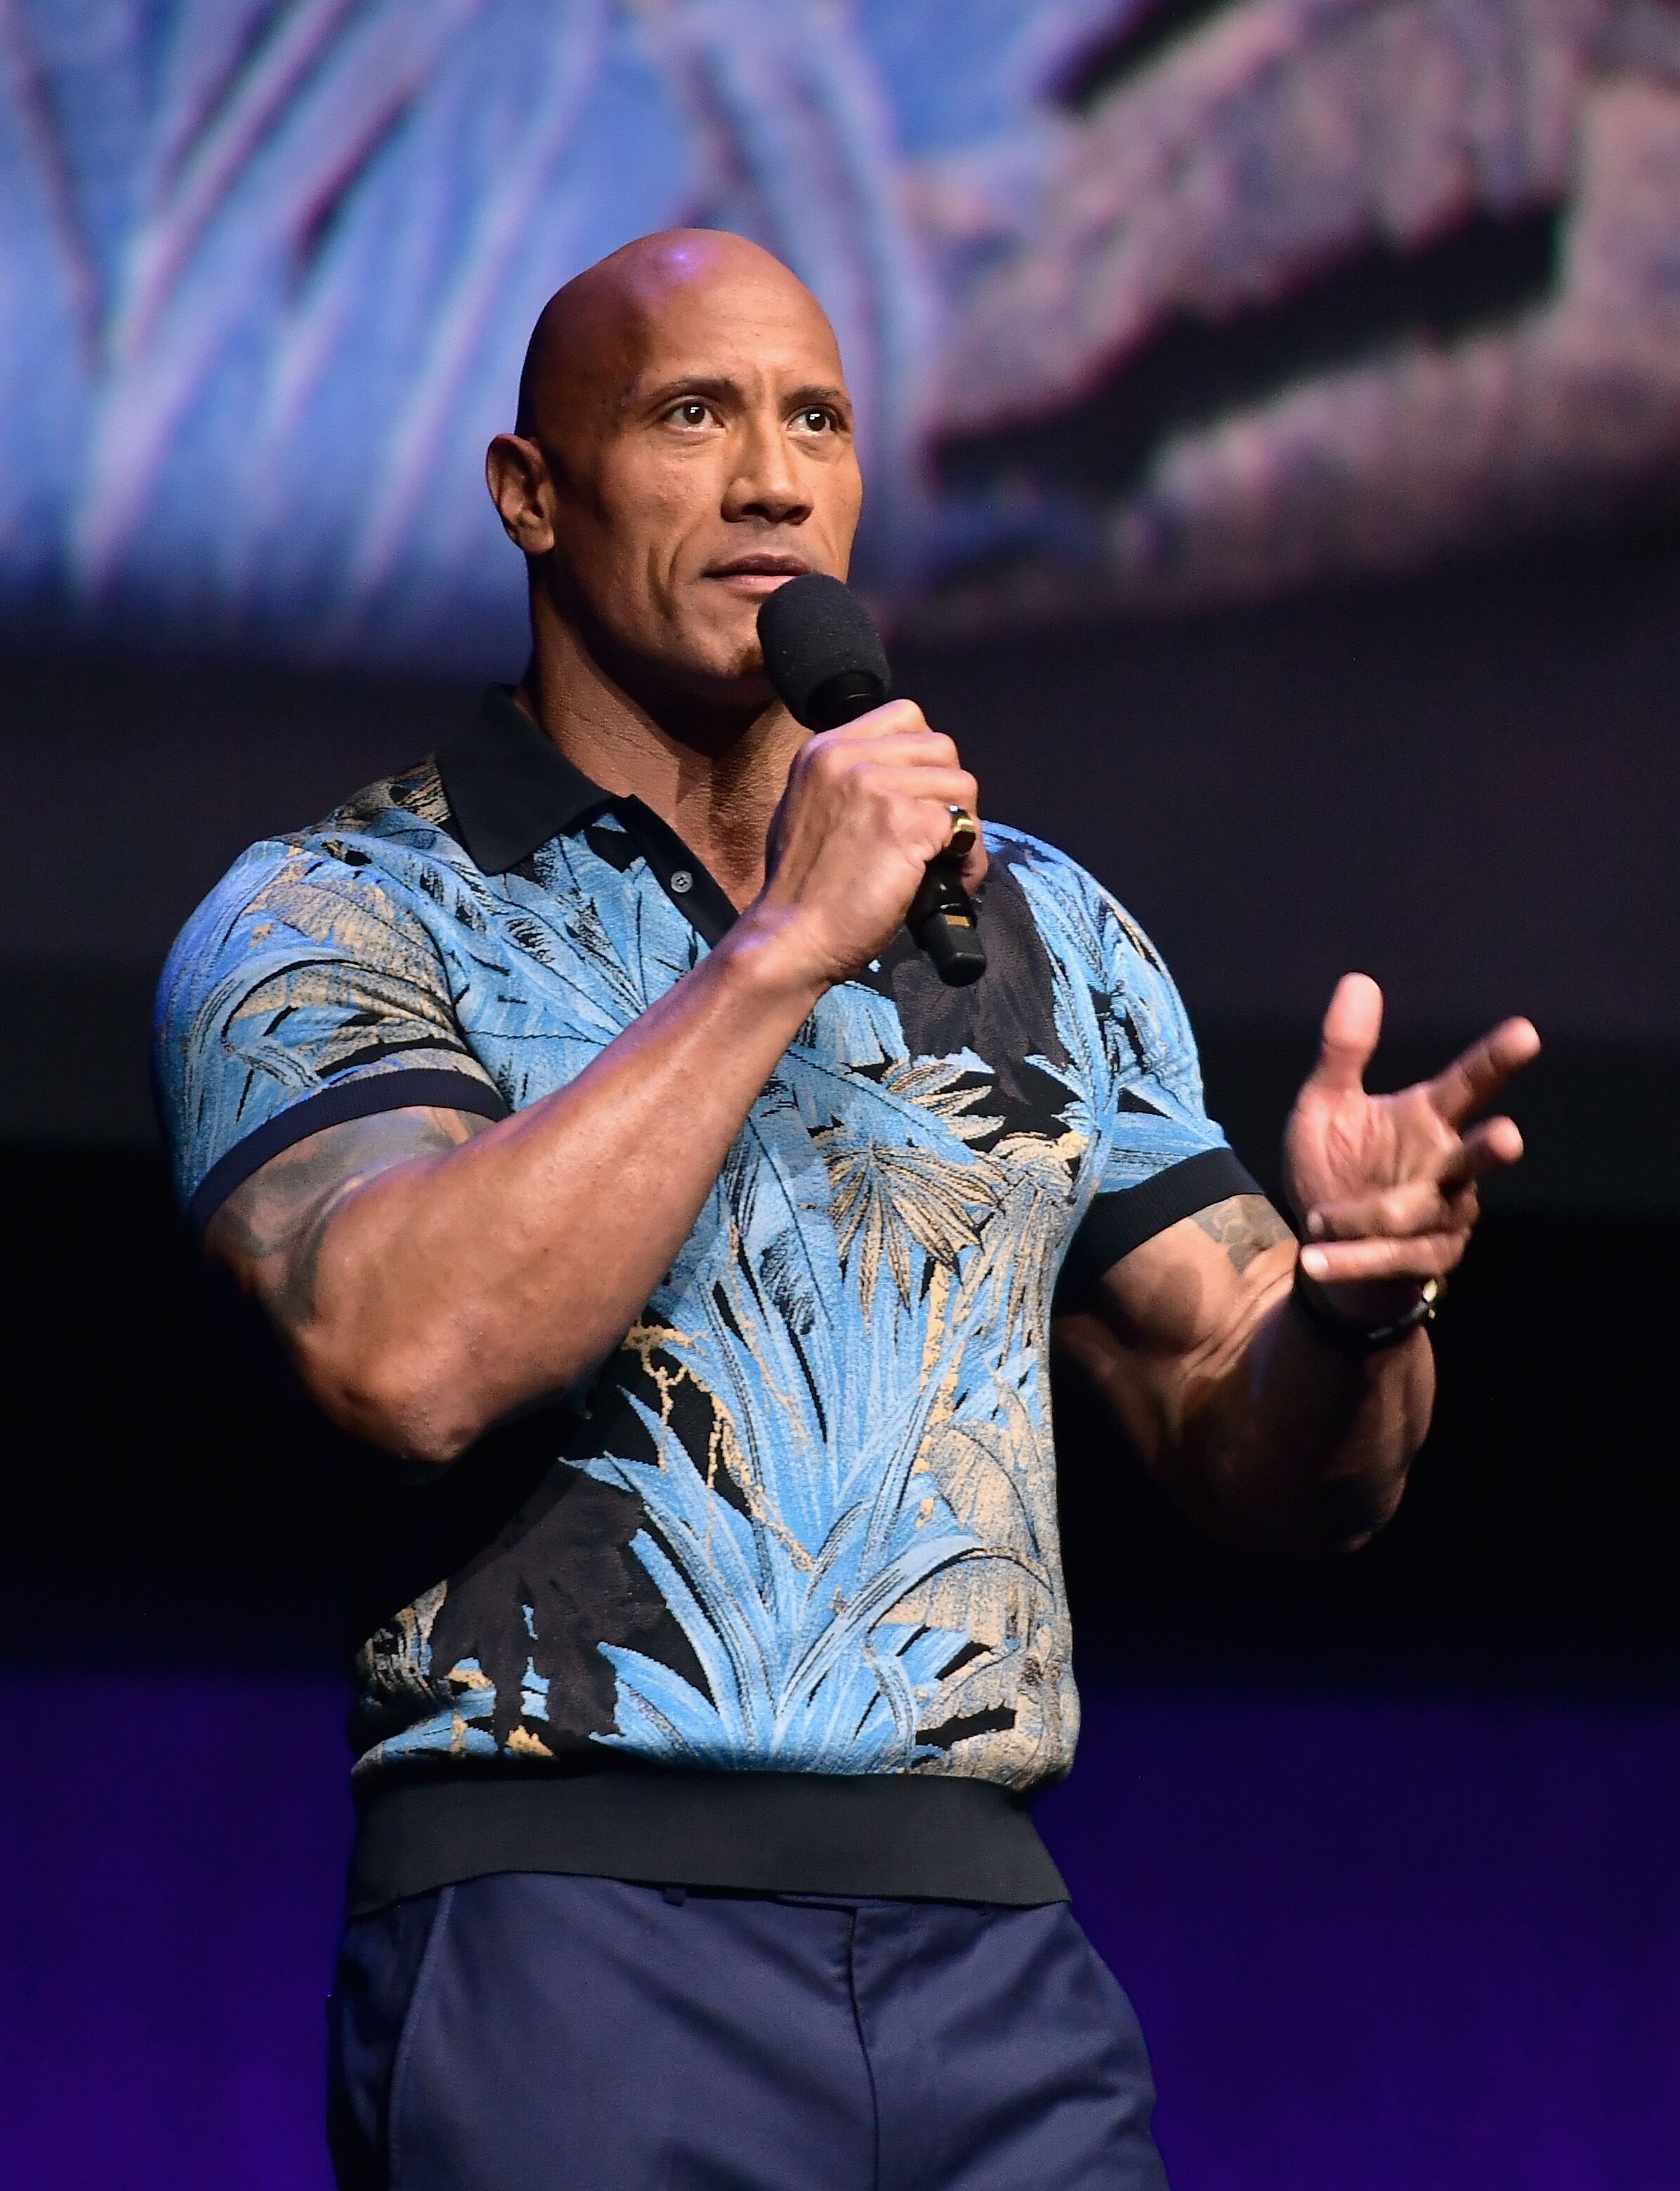  Dwayne Johnson speaks onstage at CinemaCon 2019 Universal Pictures Invites You to a Special Presentation Featuring Footage | Getty Images